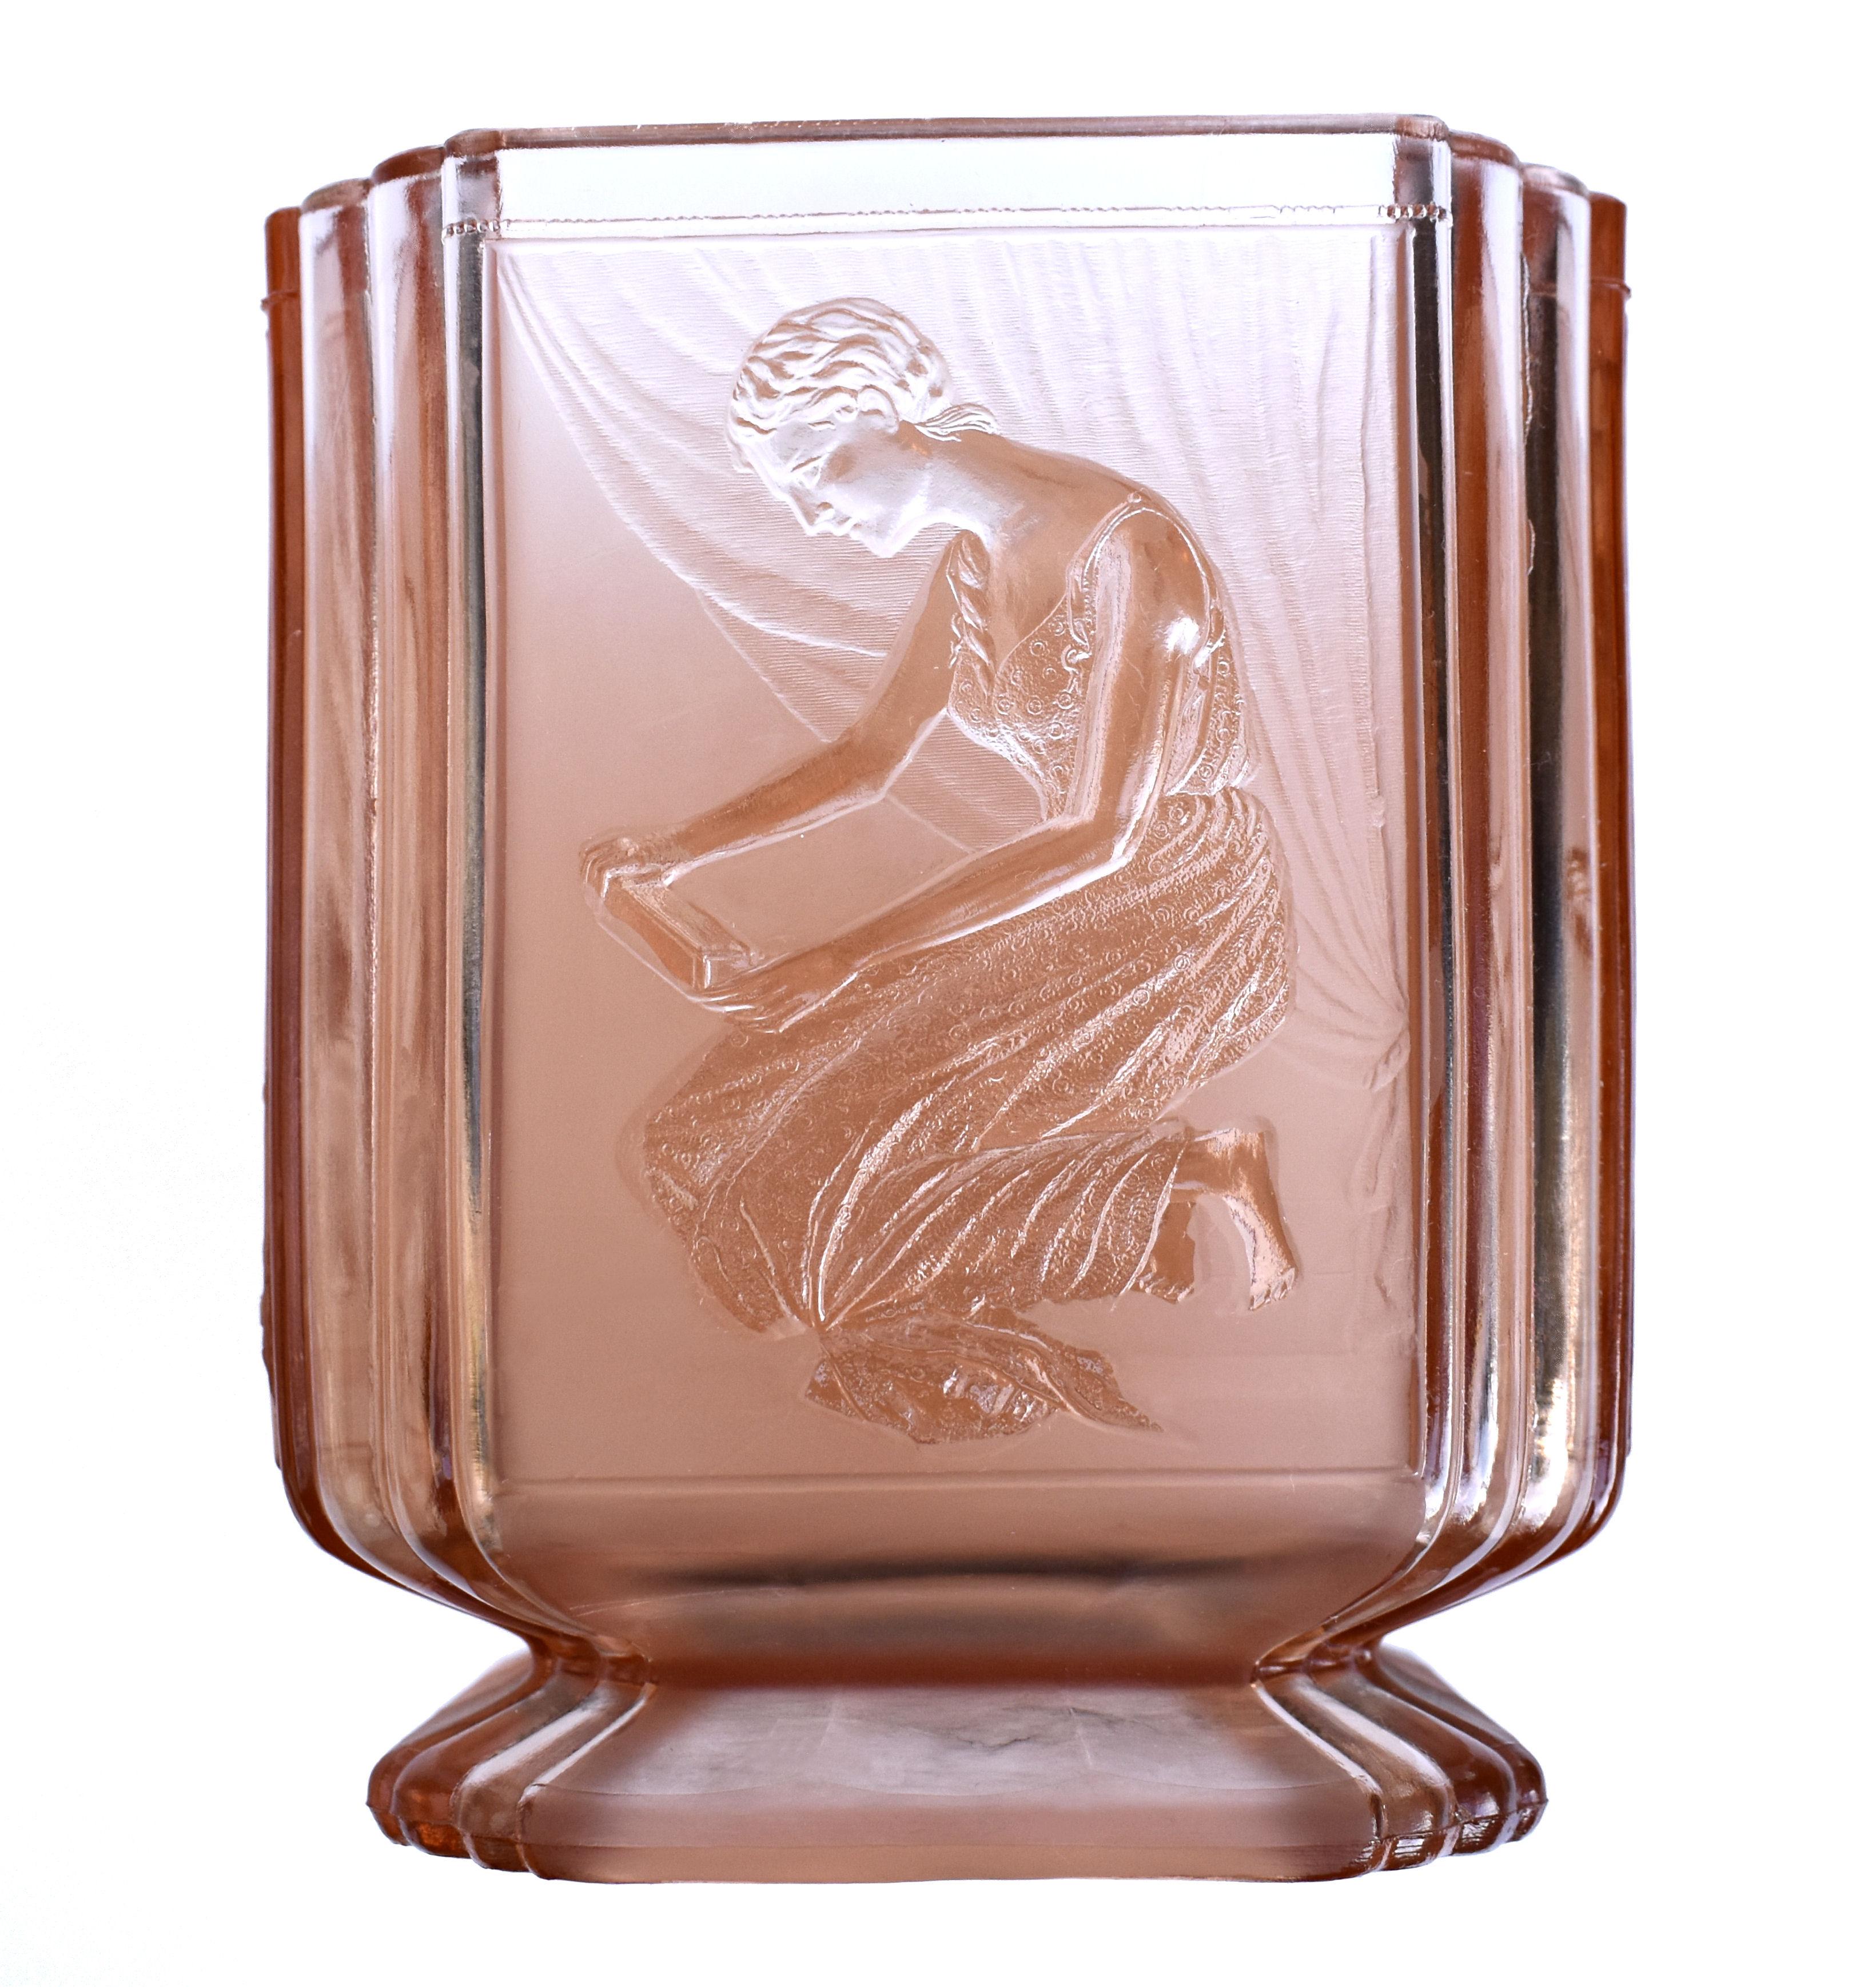 A beautiful peach coloured Art Deco biscuit jar often found being offered as a vase without its lid and nobody can deny that as such they are very decorative items, however here is an example in its entirety as intended as the ‘Pandora’s Box’ lidded